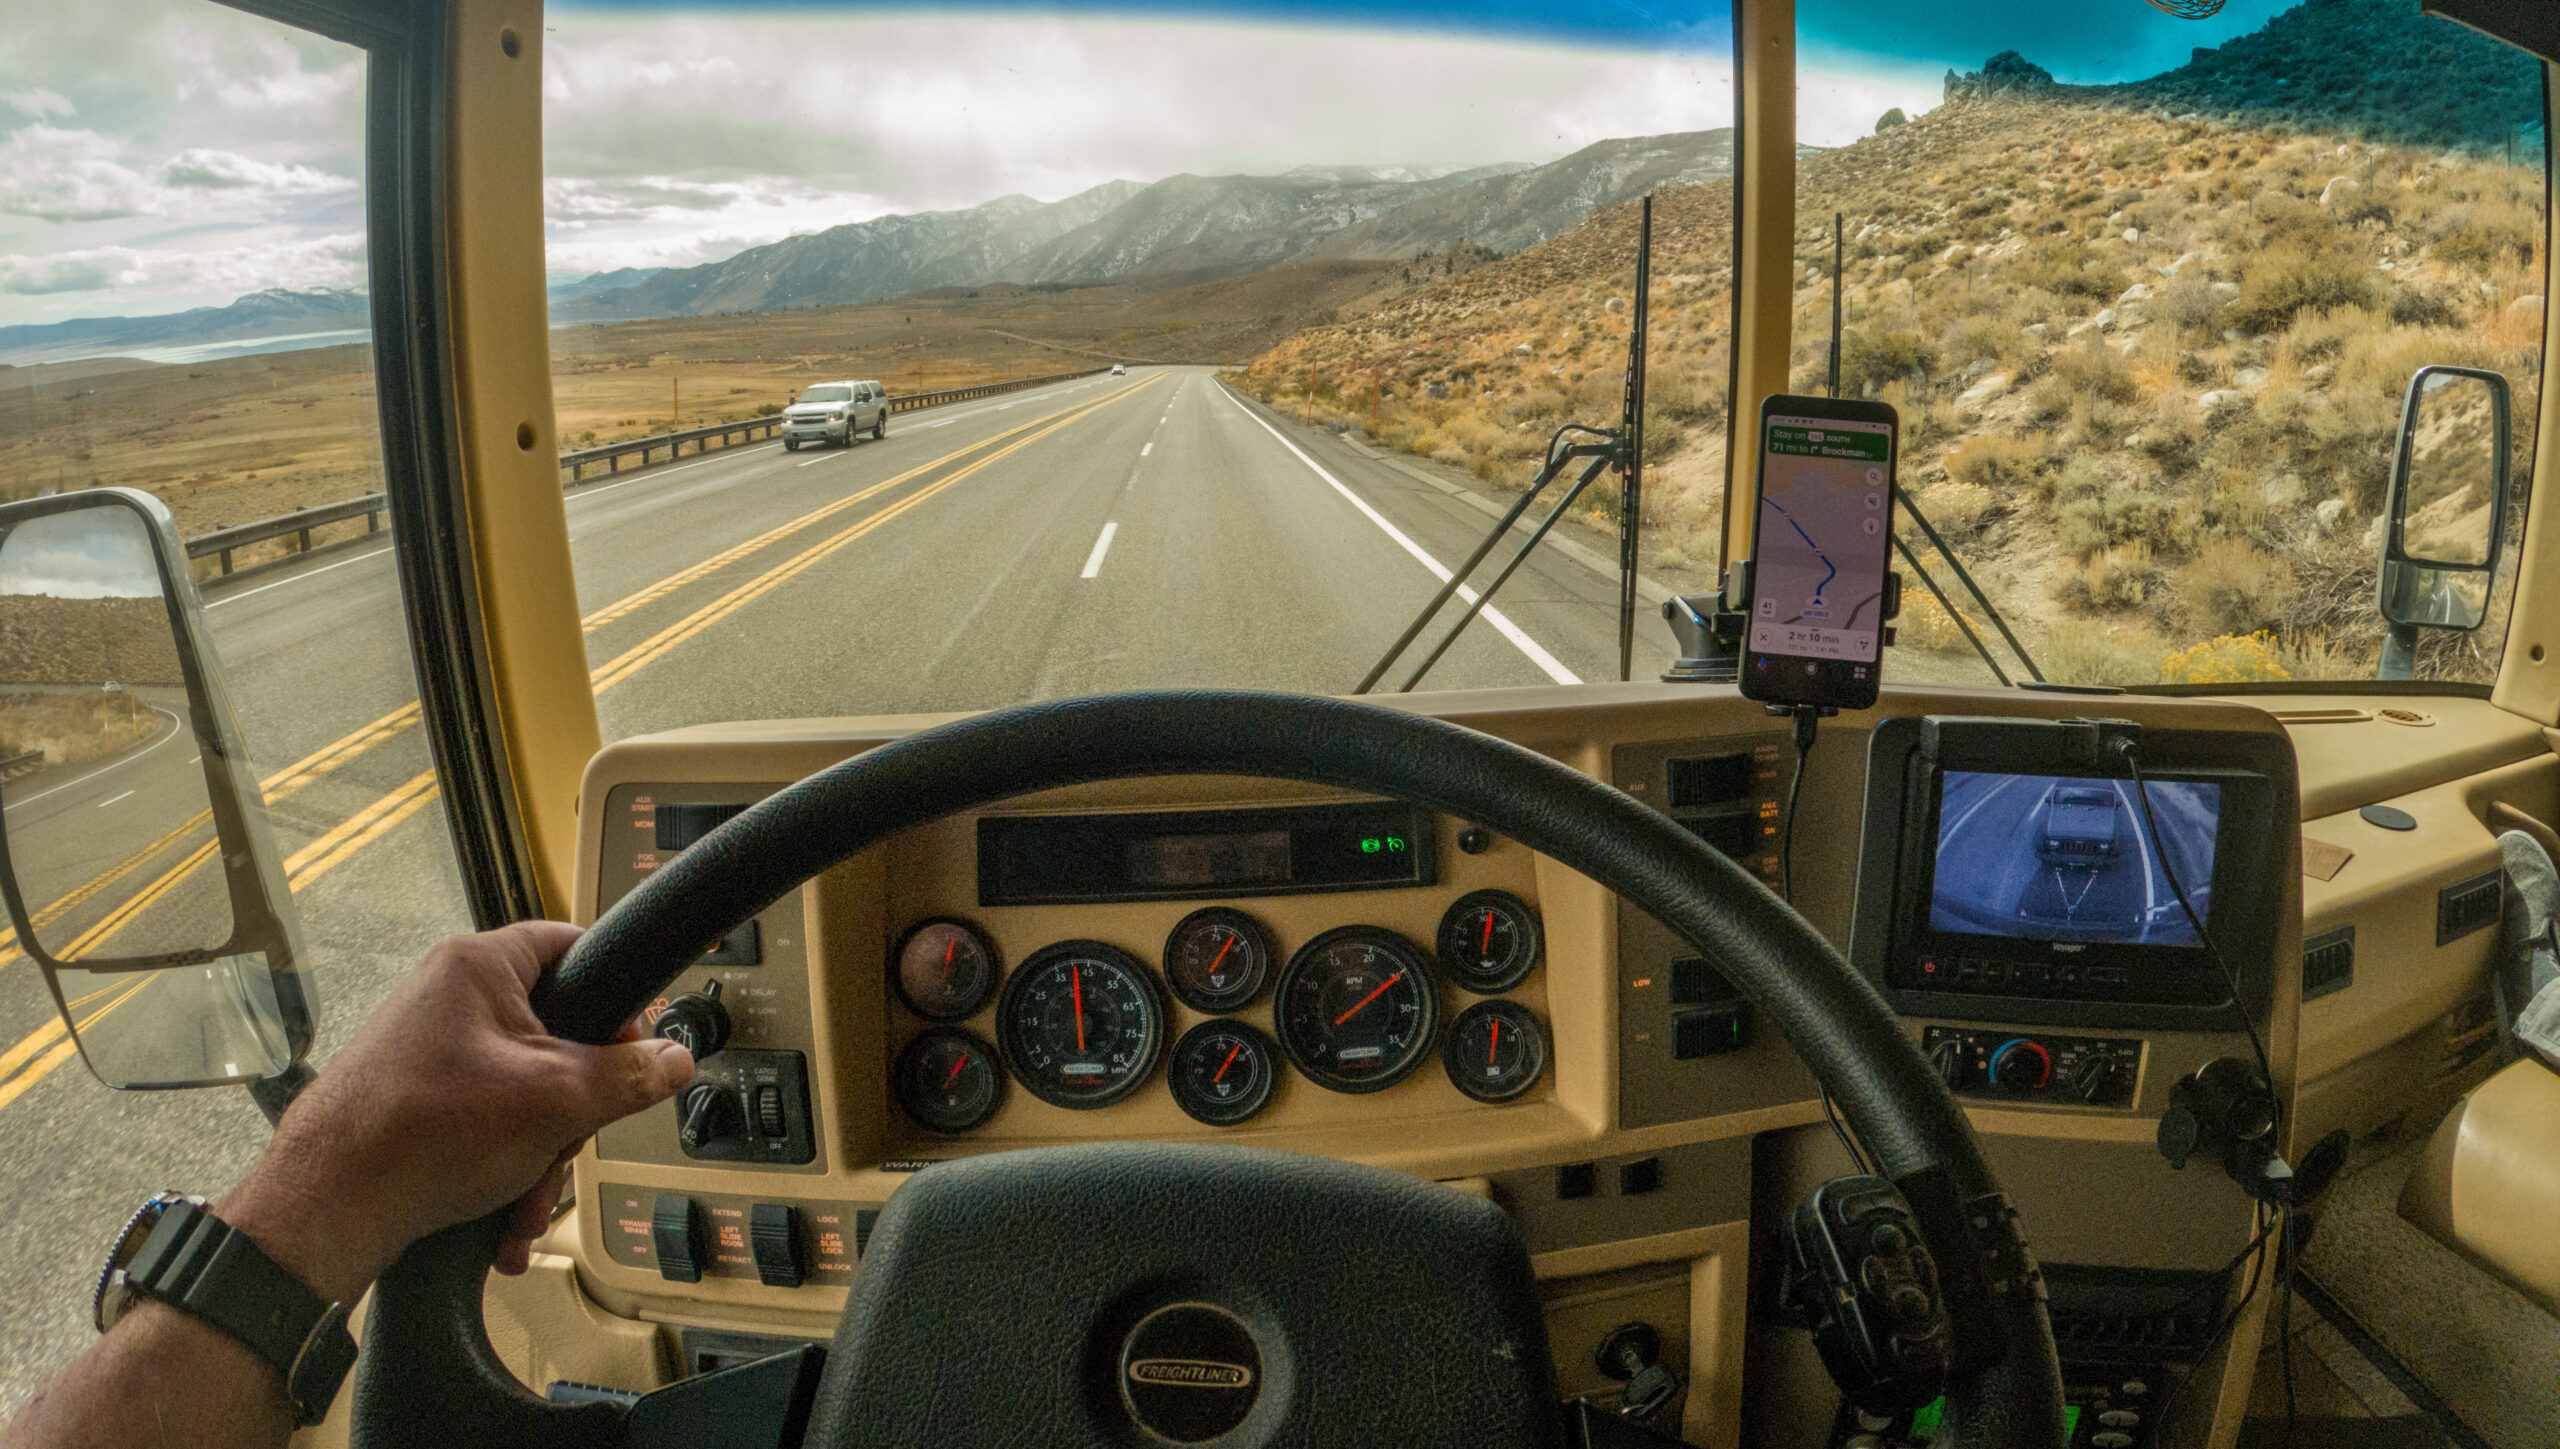 A view of Hwy 395 from the dashboard of a motorhome